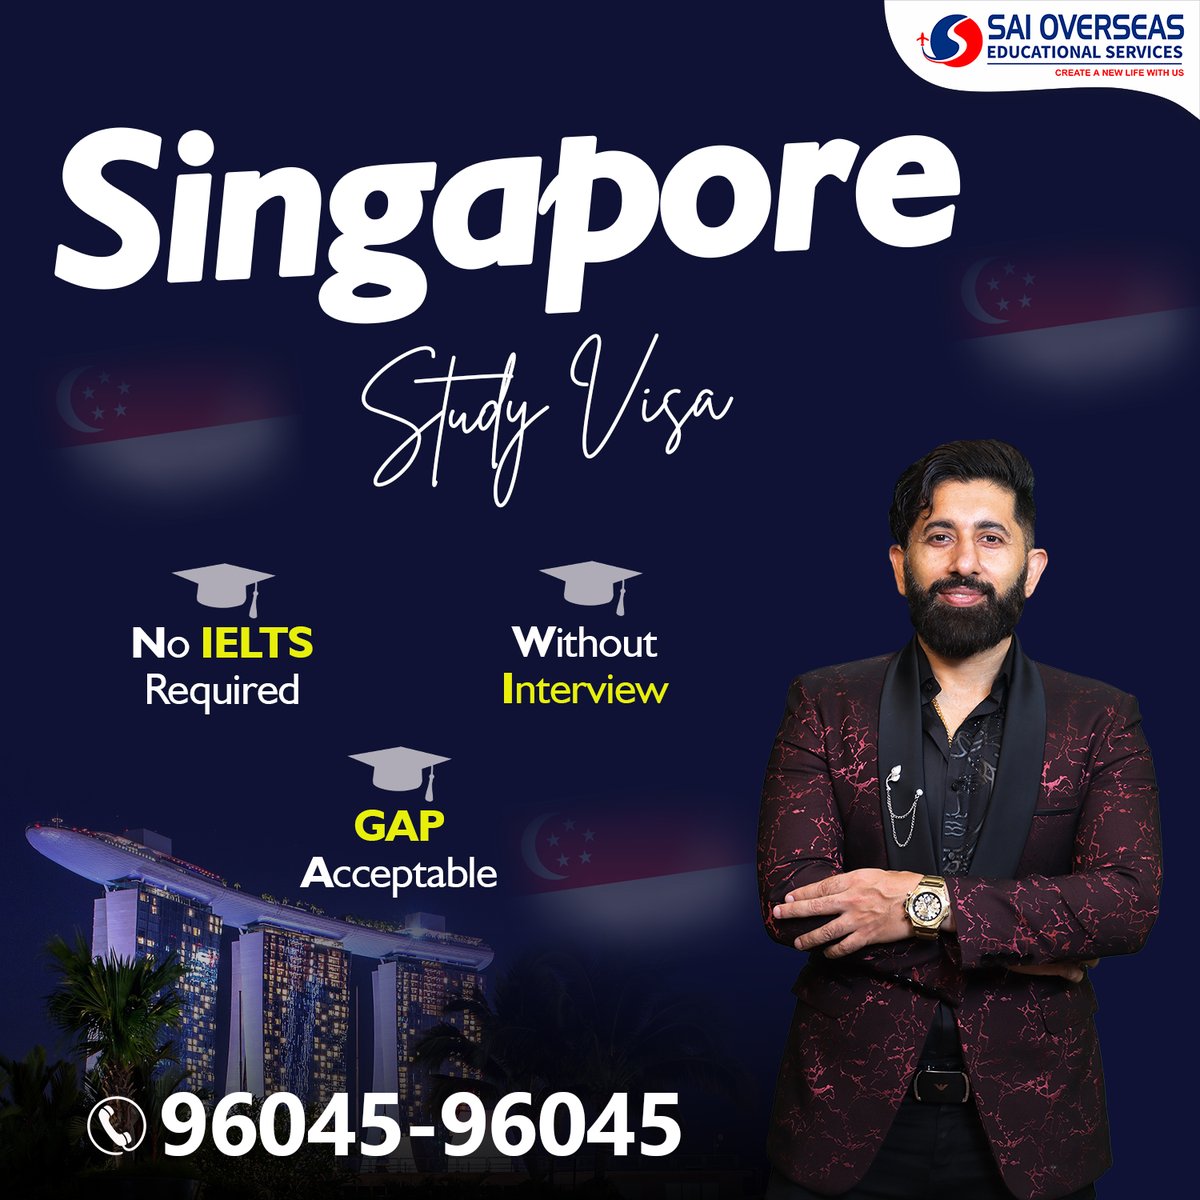 👉🏻 APPLY YOUR SINGAPORE 🇸🇬 VISA WITH SAI OVERSEAS

👉🏻 WITHOUT INTERVIEW
👉🏻 NO IELTS REQUIRED
👉🏻 GAP ACCEPTABLE

For Detailed information call us at 9604596045

#singapore #singaporevisa #visa #studyinsingapore #studyabroad #instagram #photooftheday #singaporevisa🇸🇬 #immigration